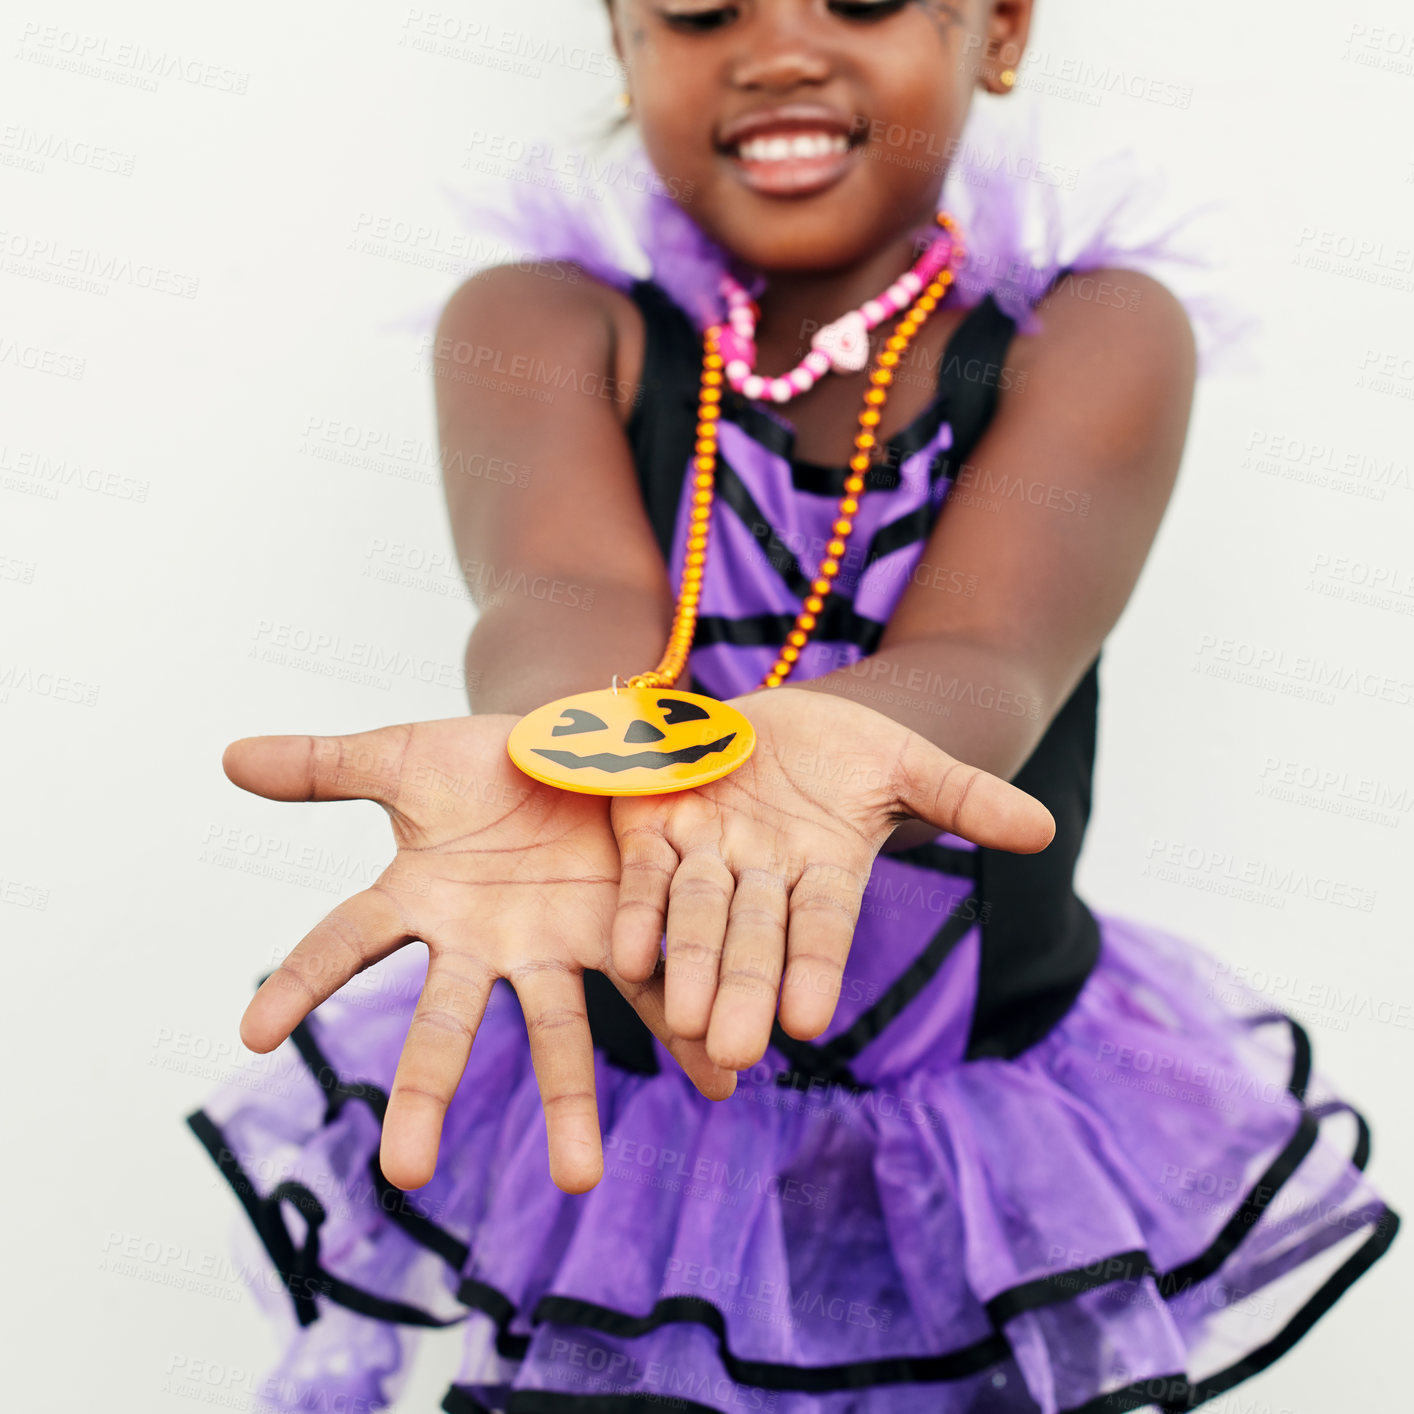 Buy stock photo Shot of a little girl holding a jack o lantern pendant in her hands against a white background